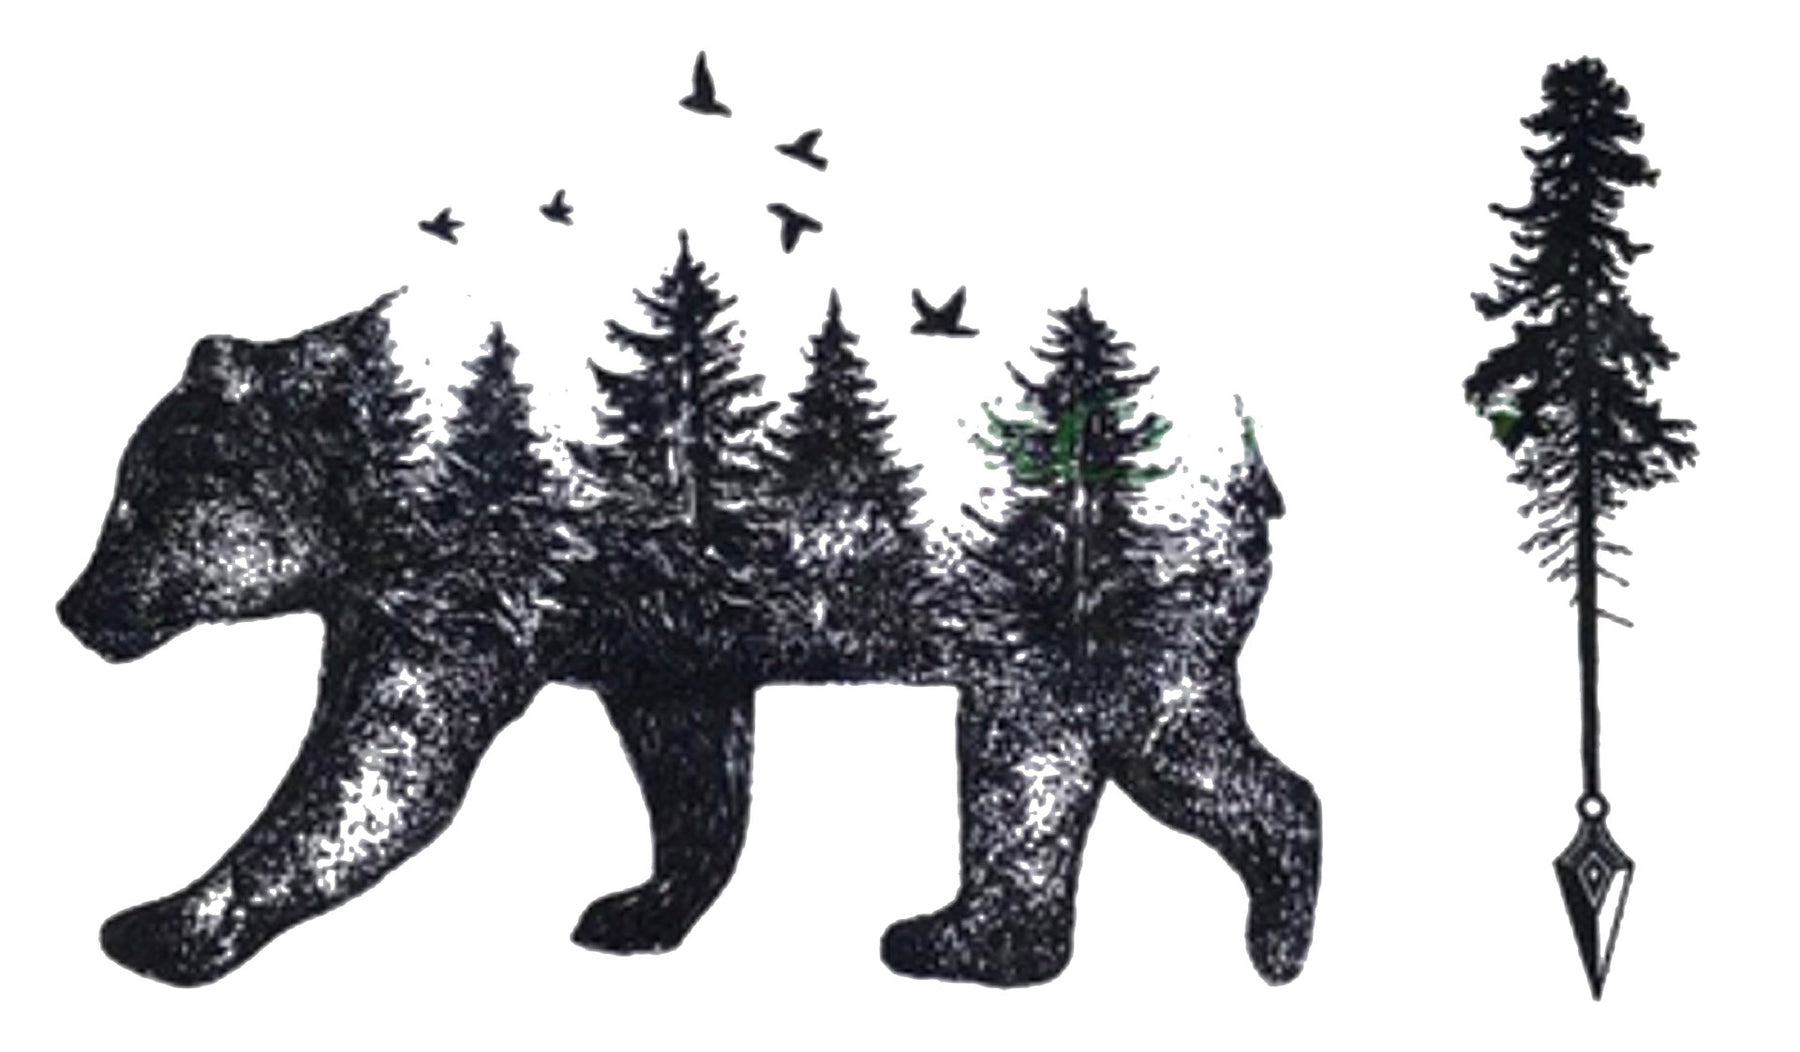 Wallpaper Roll Bear silhouette for tshirt print or temporary tattoo Hand  drawn surreal design for apparel Black animal night forest landscape  Vintage vector illustration sketch isolated on white background   PIXERSNETAU